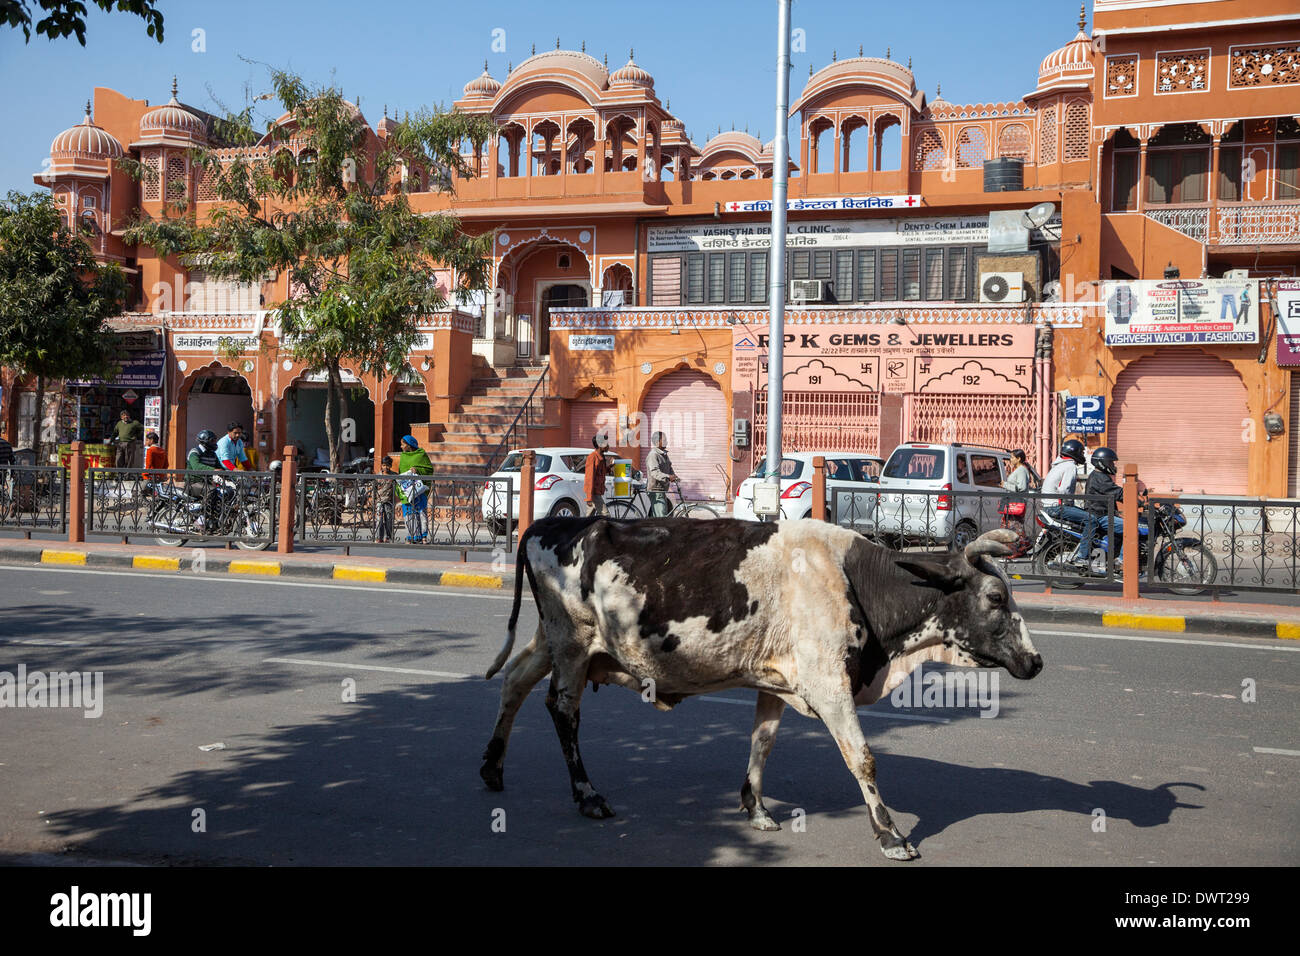 Jaipur, Rajasthan, India. Street Scene on a Main Street in 'The Pink City.' Stock Photo